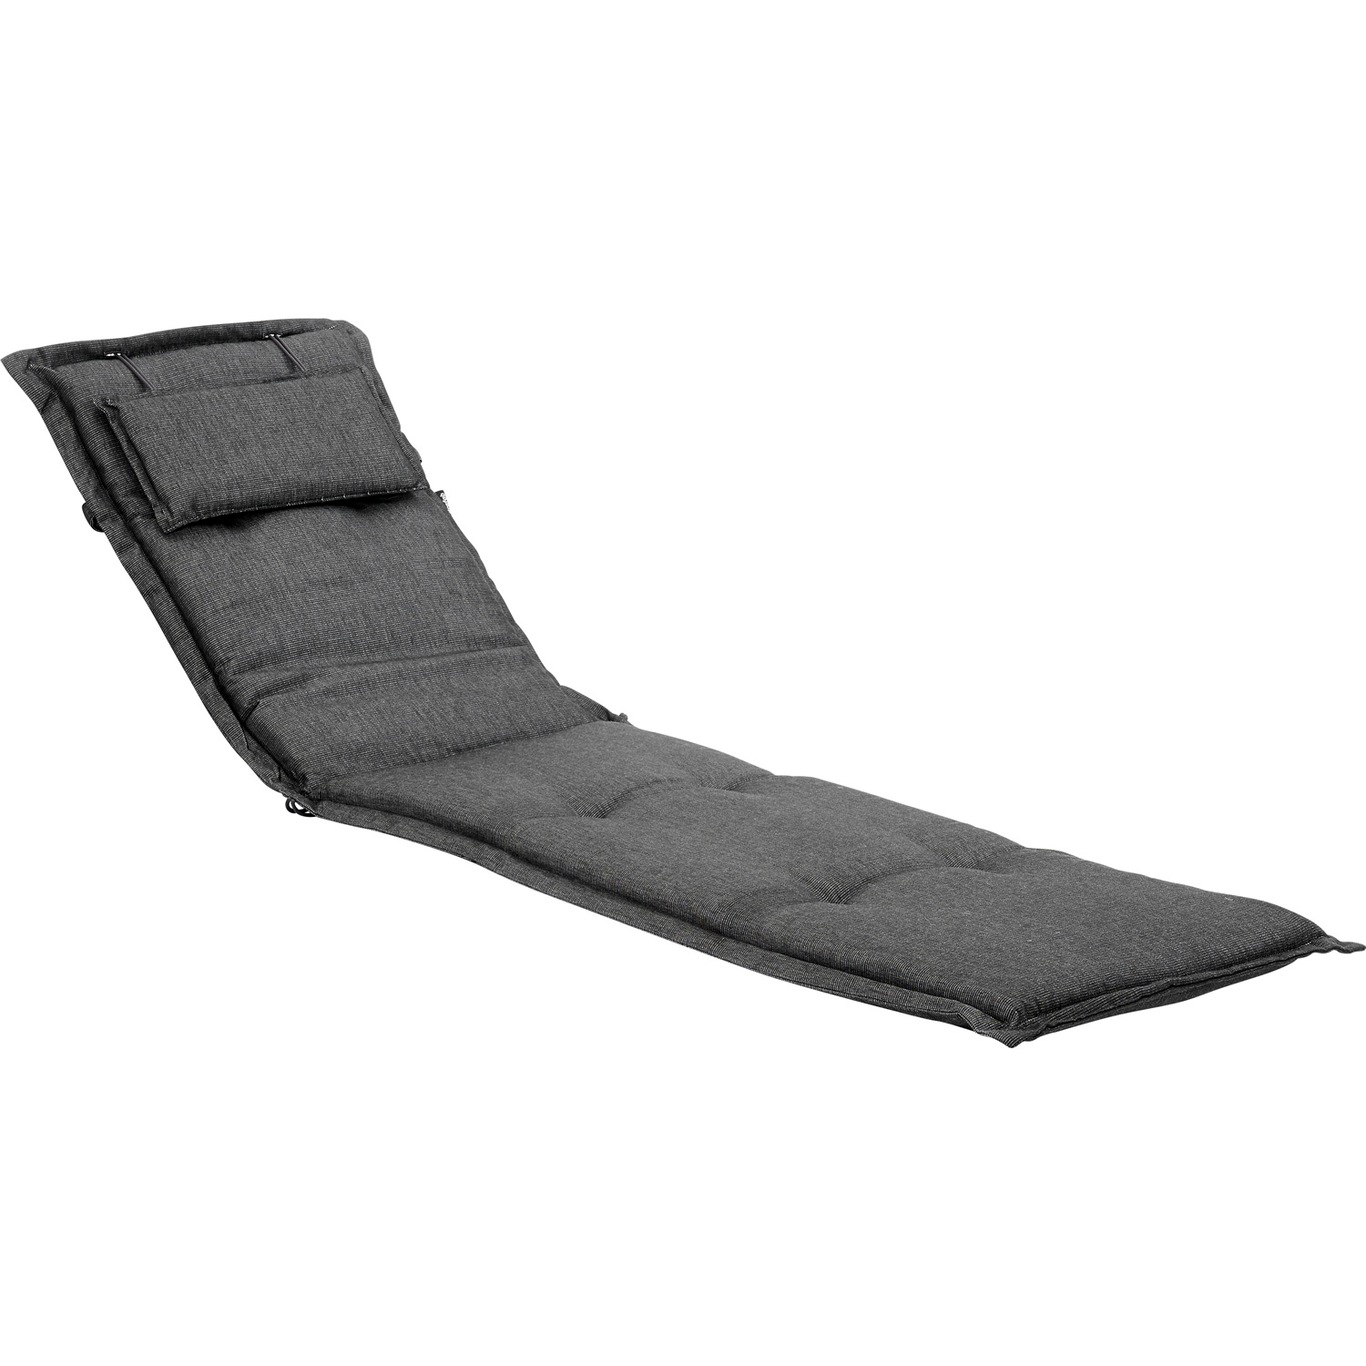 Florina Restbed Pad 49, Anthracite